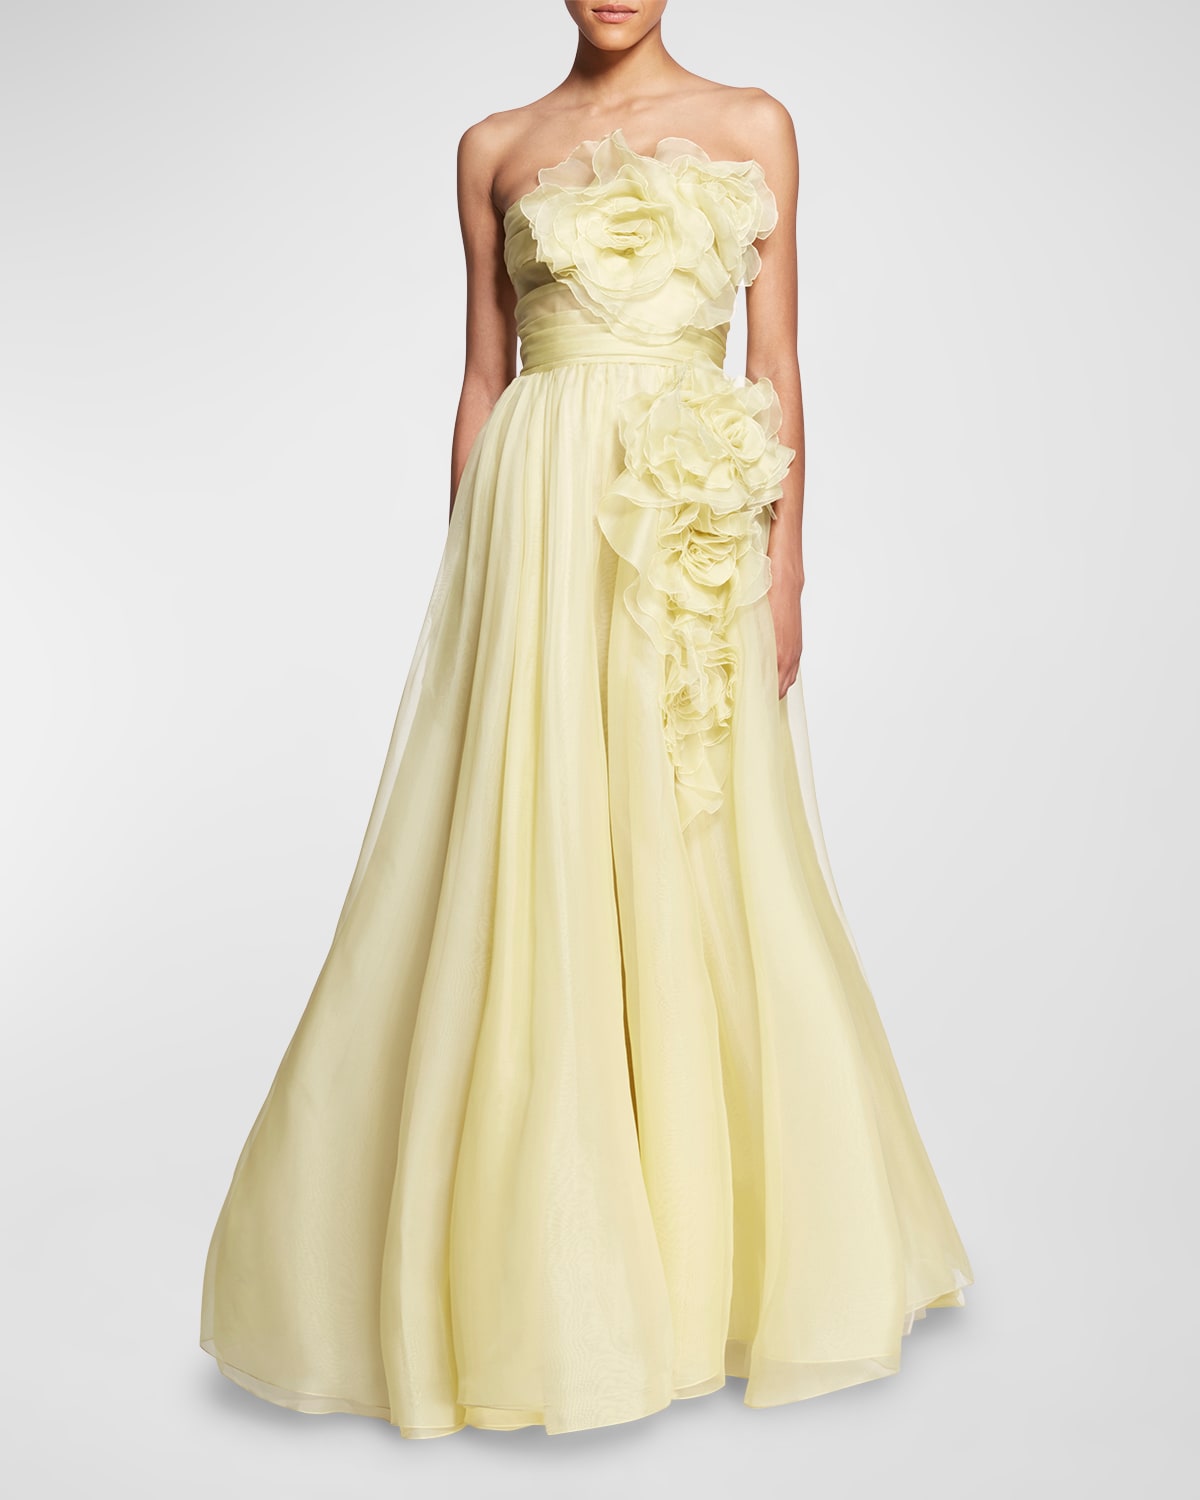 MARCHESA FLORAL DRAPED STRAPLESS ORGANZA GOWN 